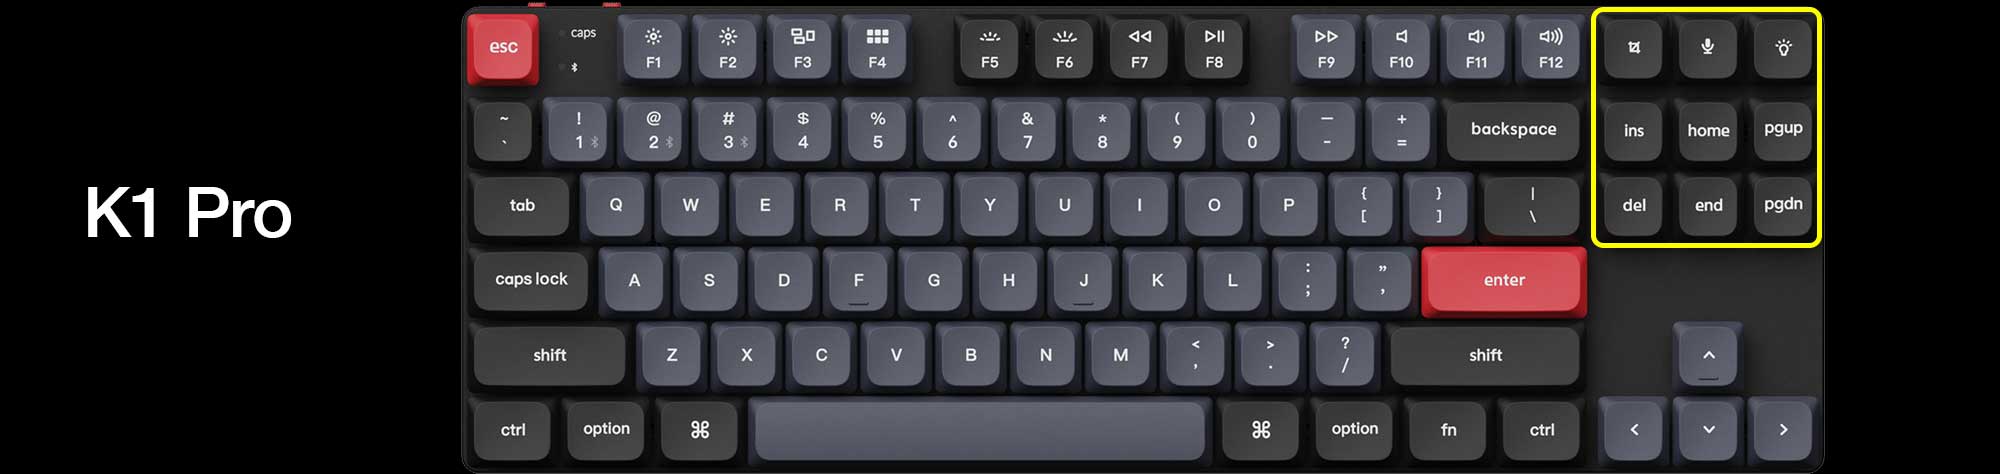 layout difference K1 Pro